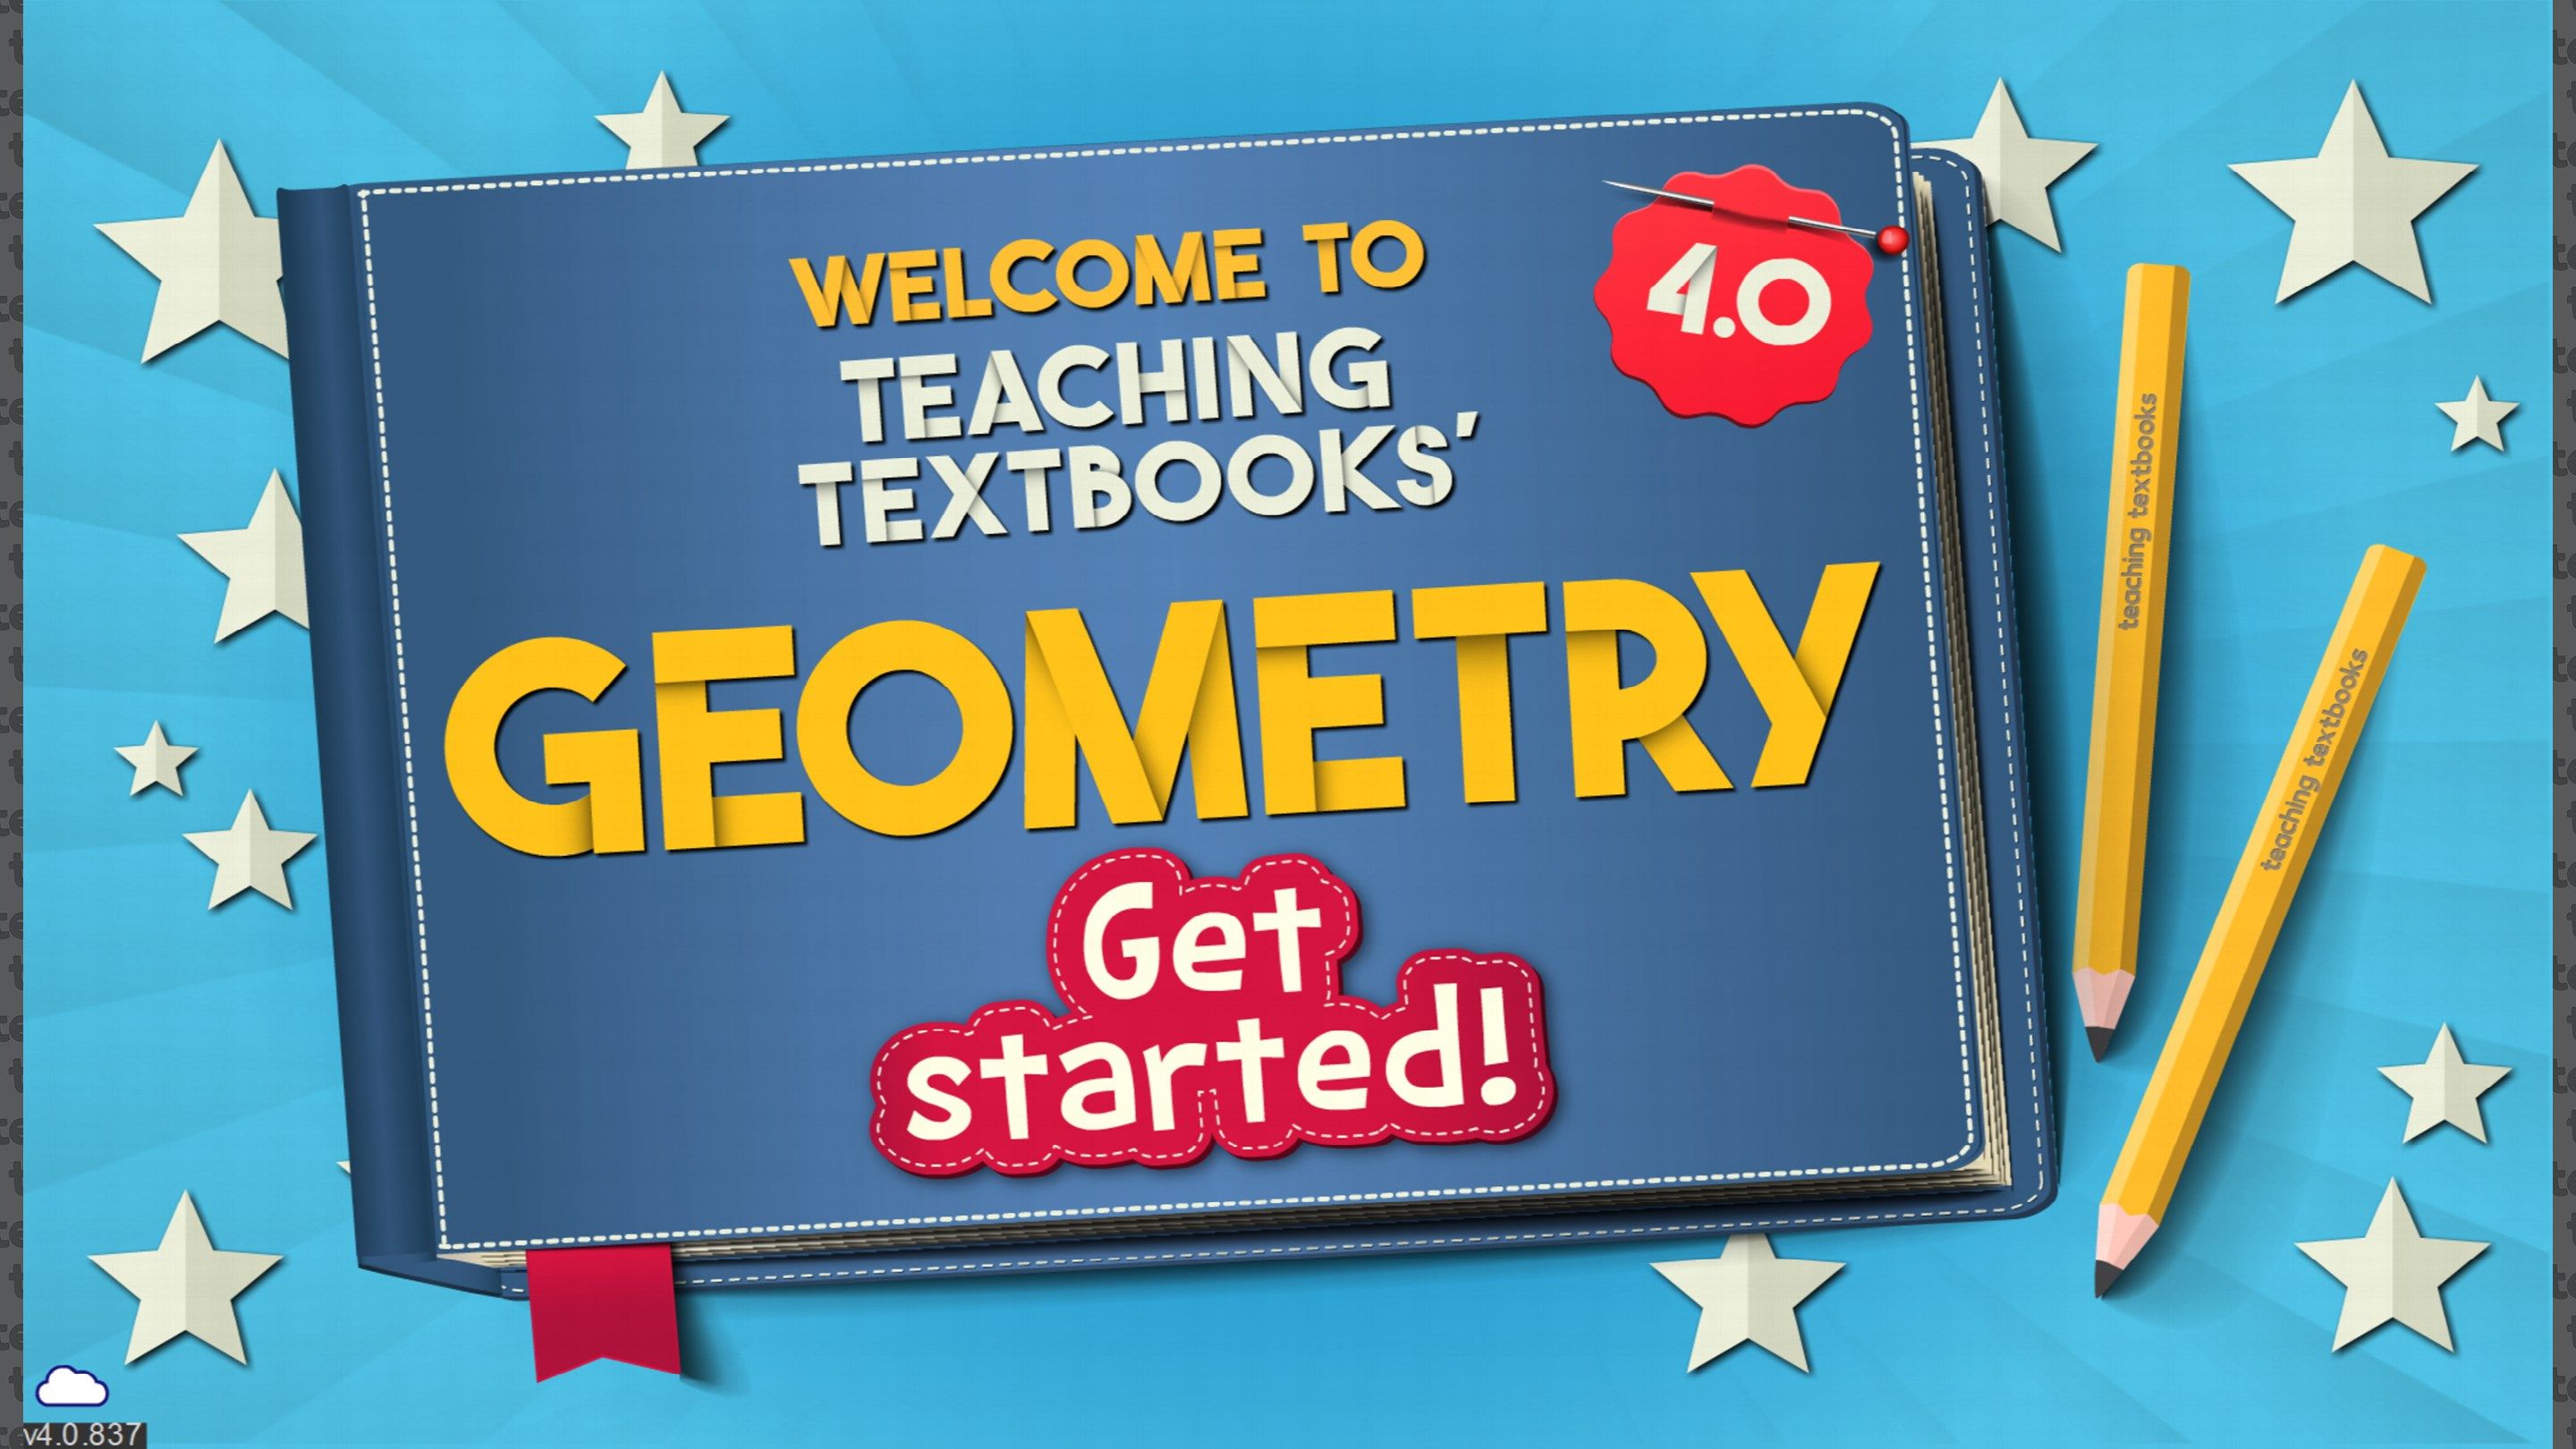 When the app launches, all you have to do to get started is log in with your Teaching Textbooks parent account, and it will connect to your Geometry enrollment.